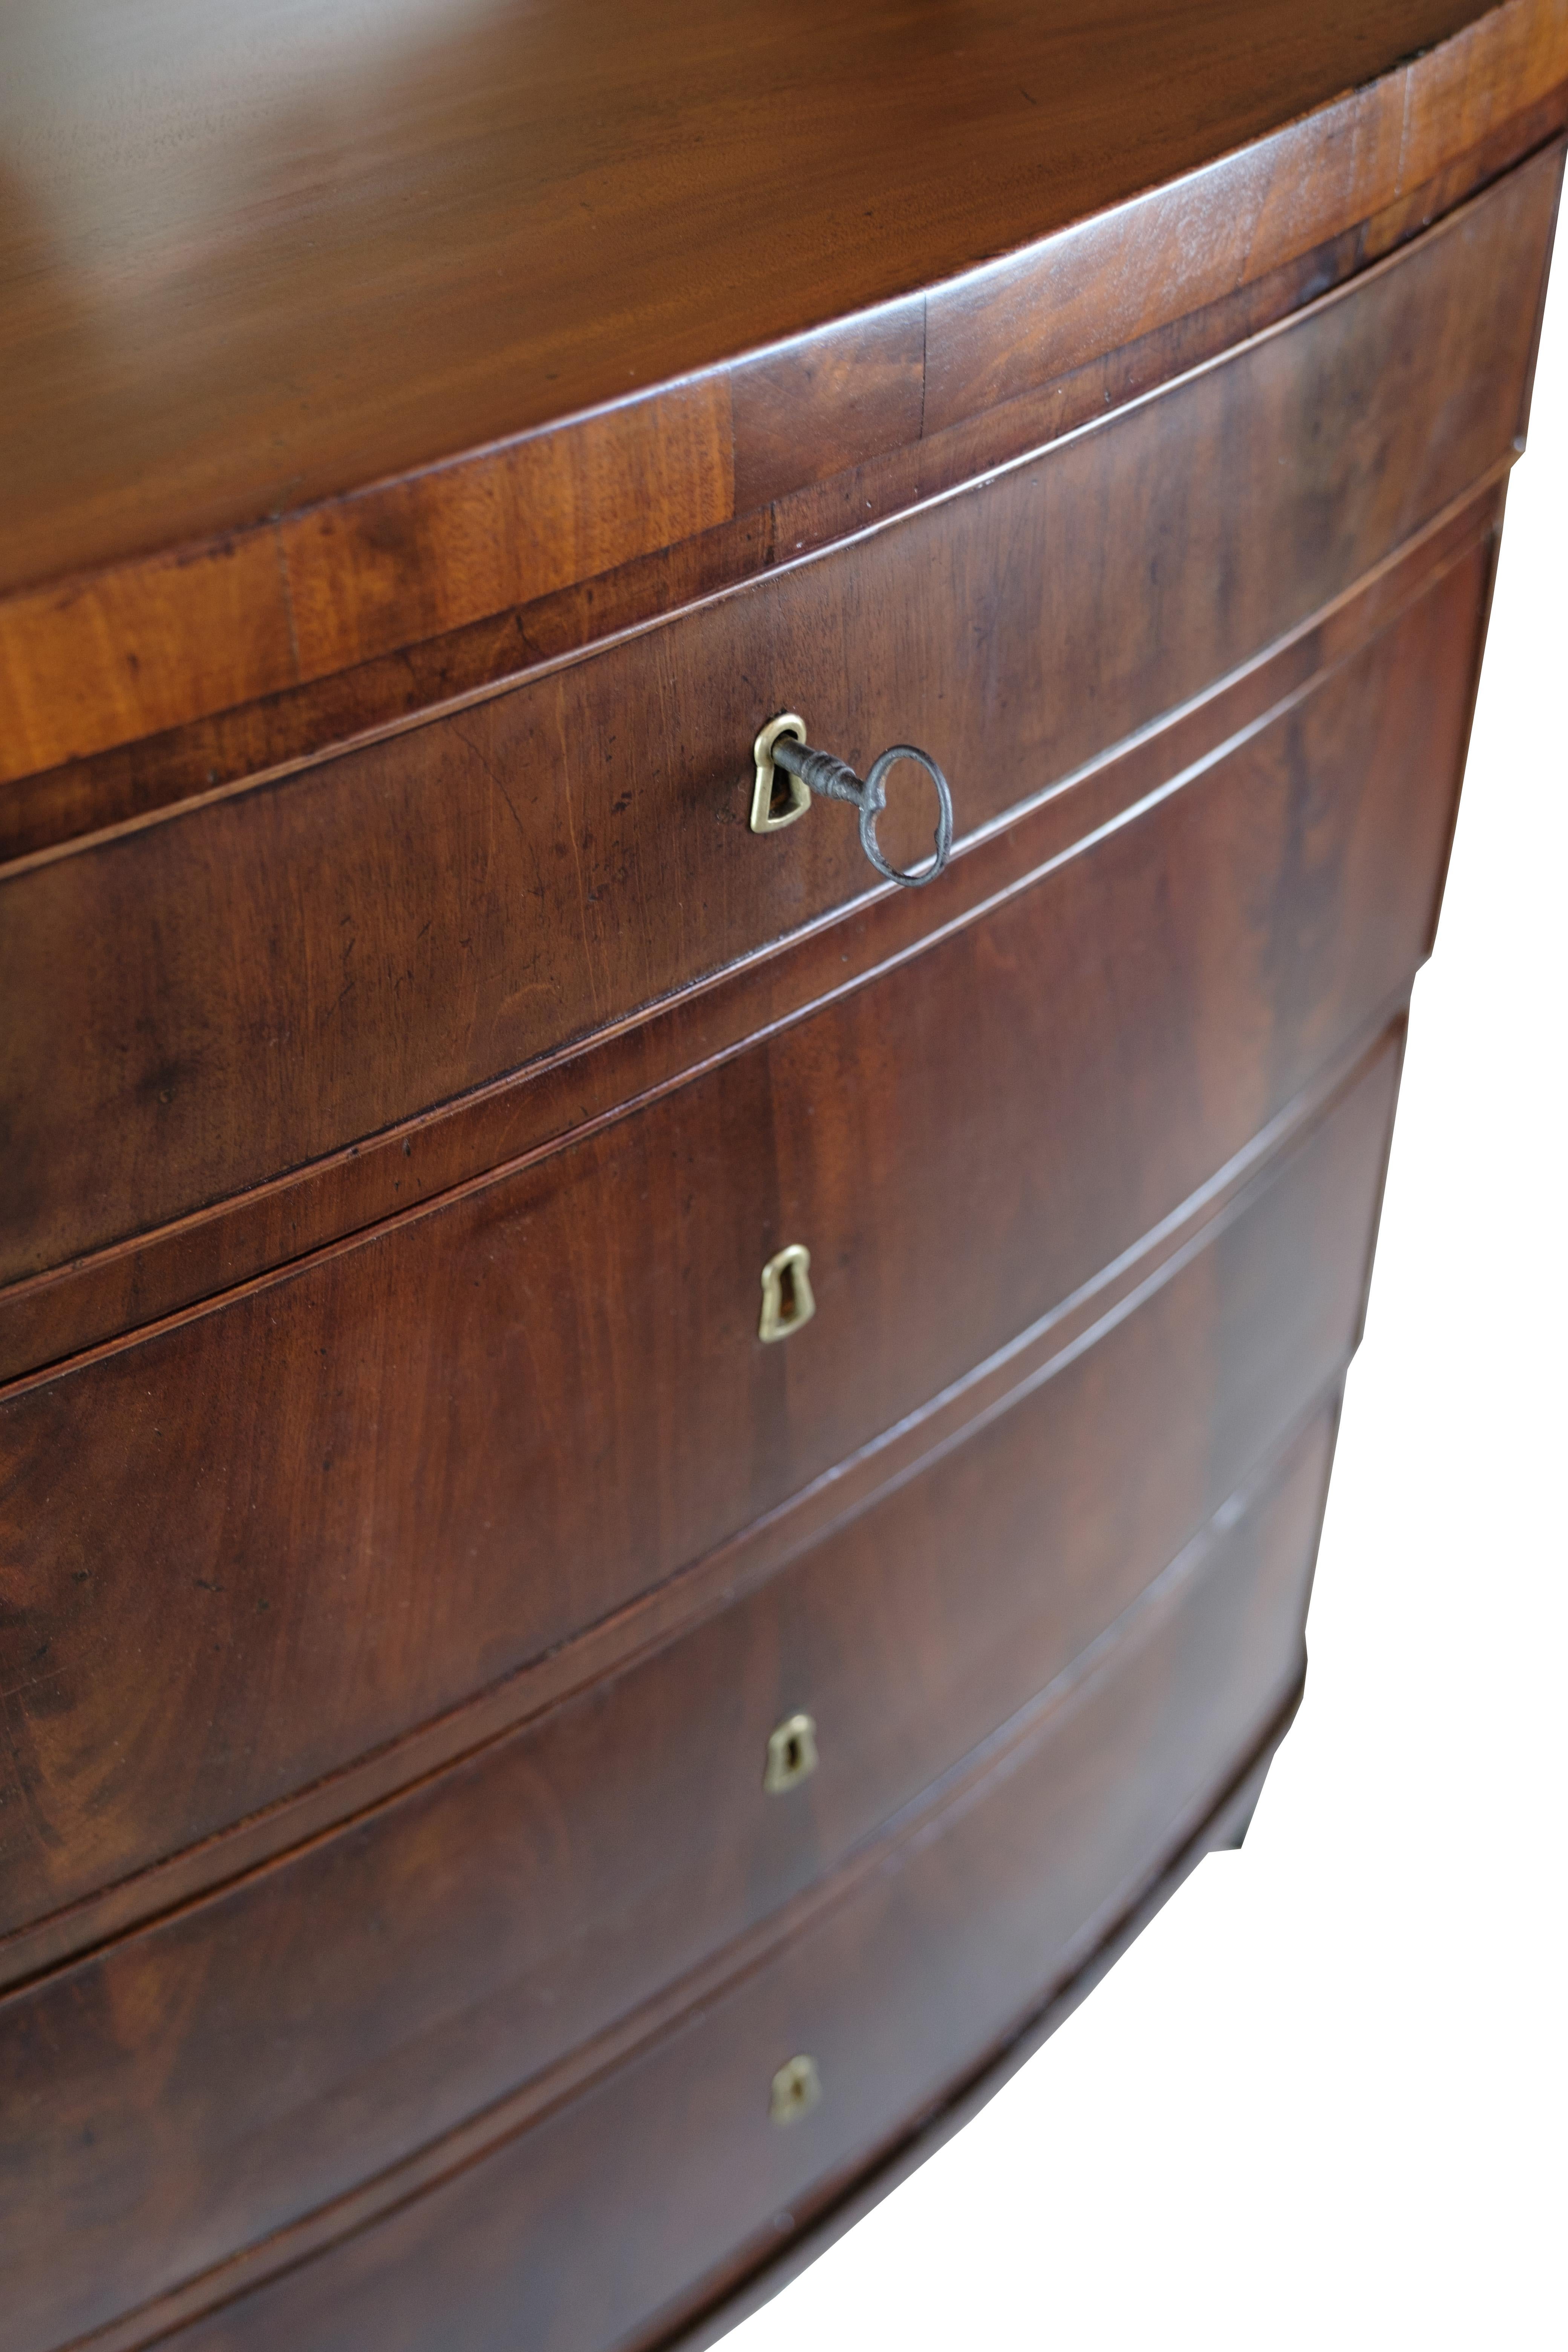 An Empire chest of drawers in polished mahogany with a curved front from around the 1820s is a fantastic example of classic and elegant furniture design from the early 1800s.

Mahogany wood is an exclusive wood with a rich and deep color that gives